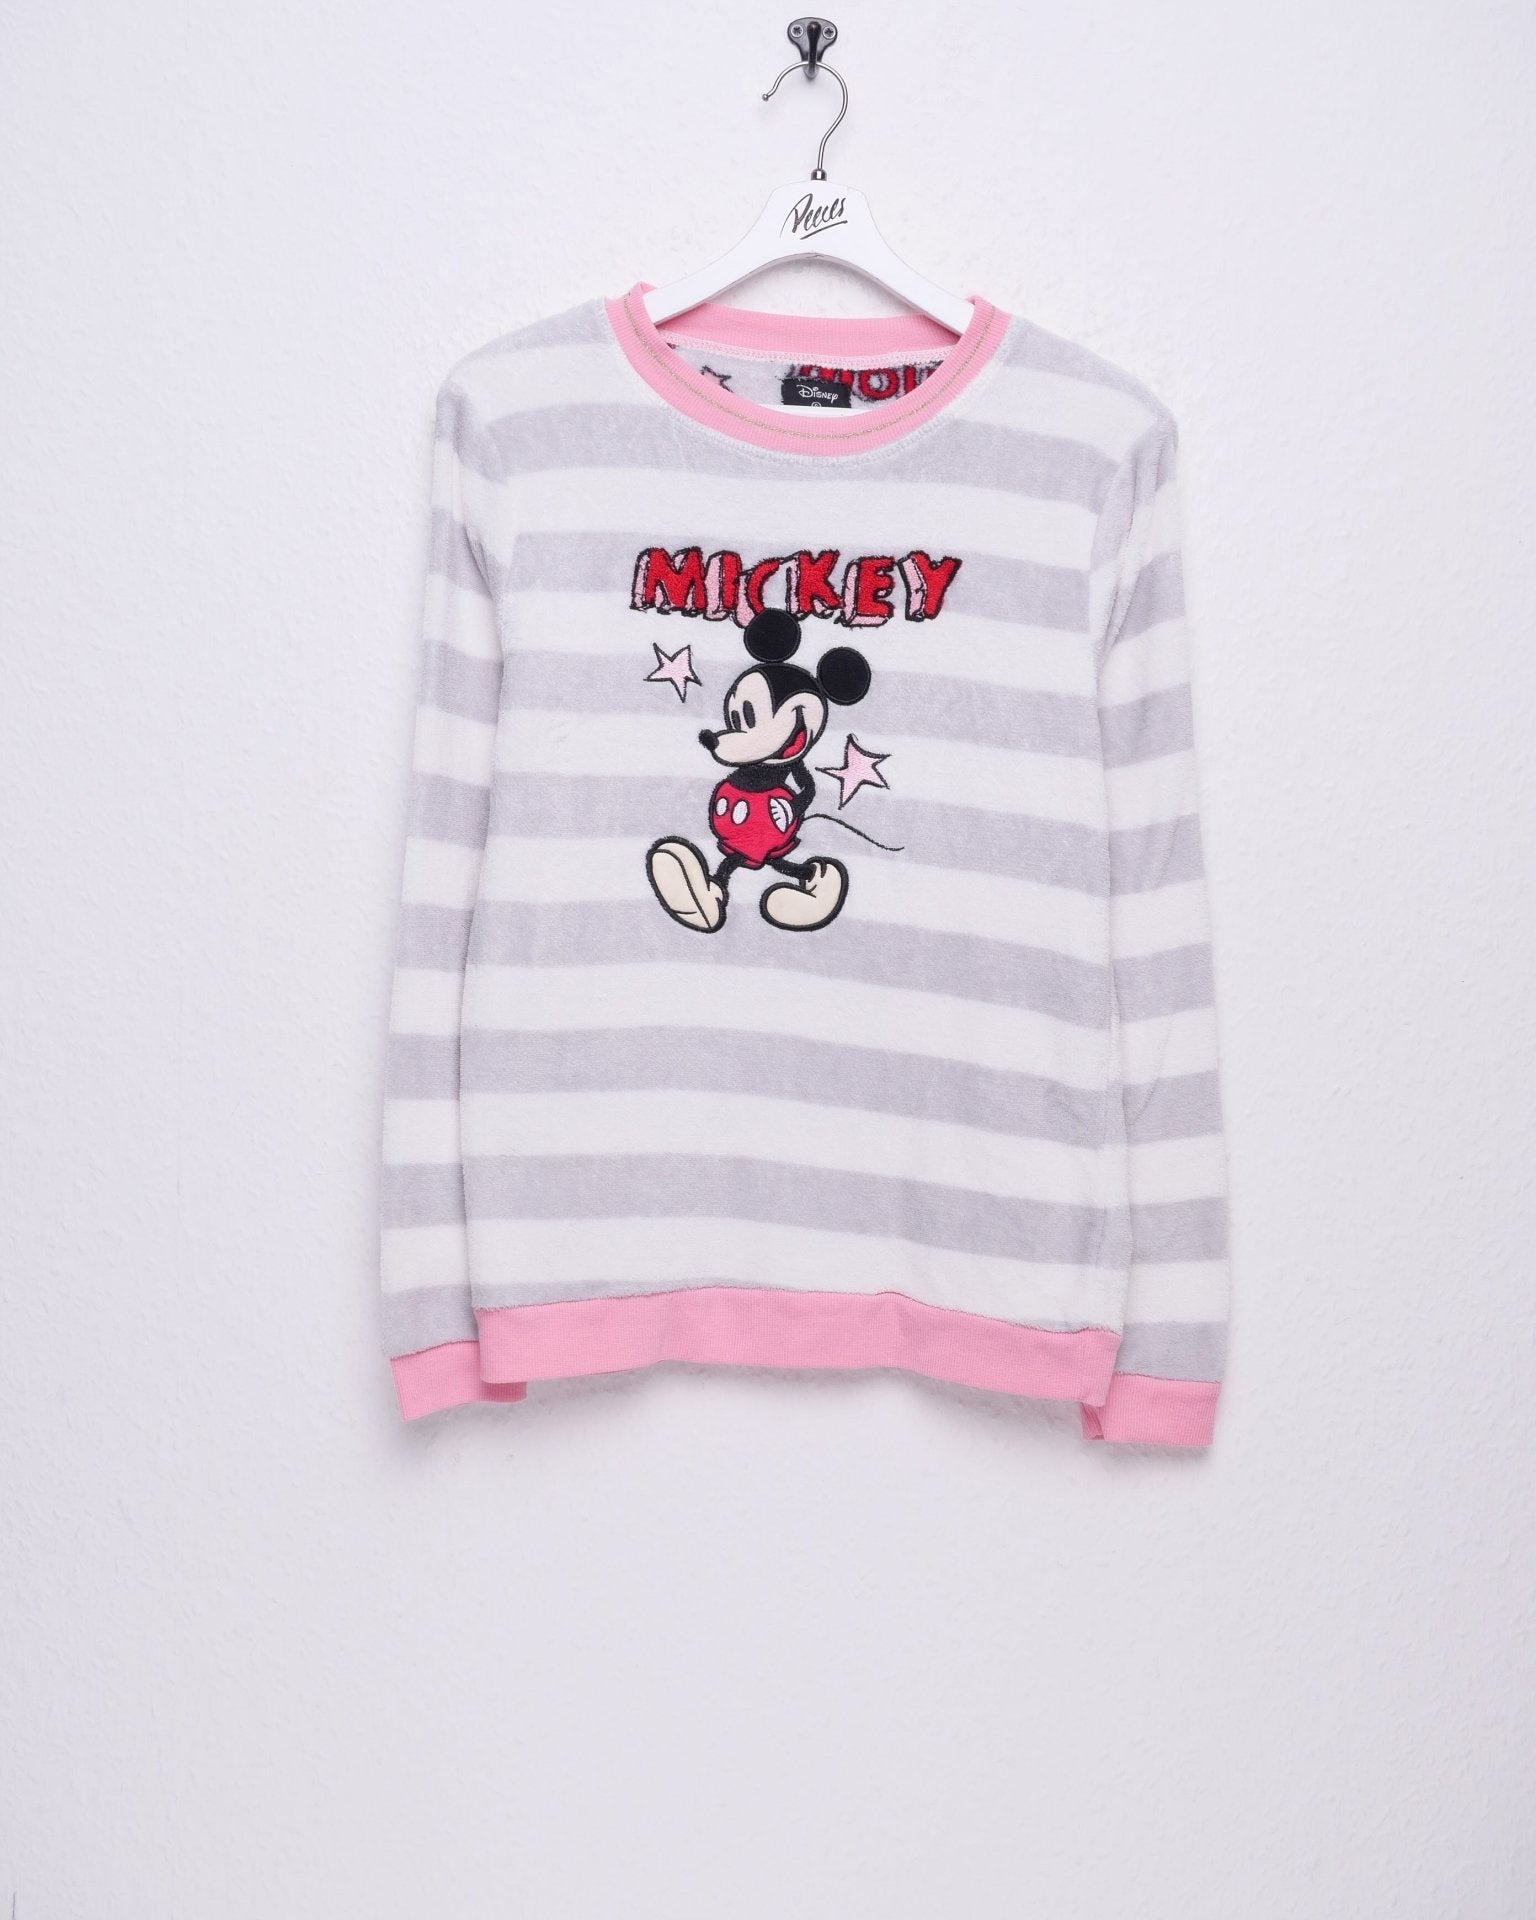 Disney embroidered Mickey Mouse Vintage Sweater - Peeces